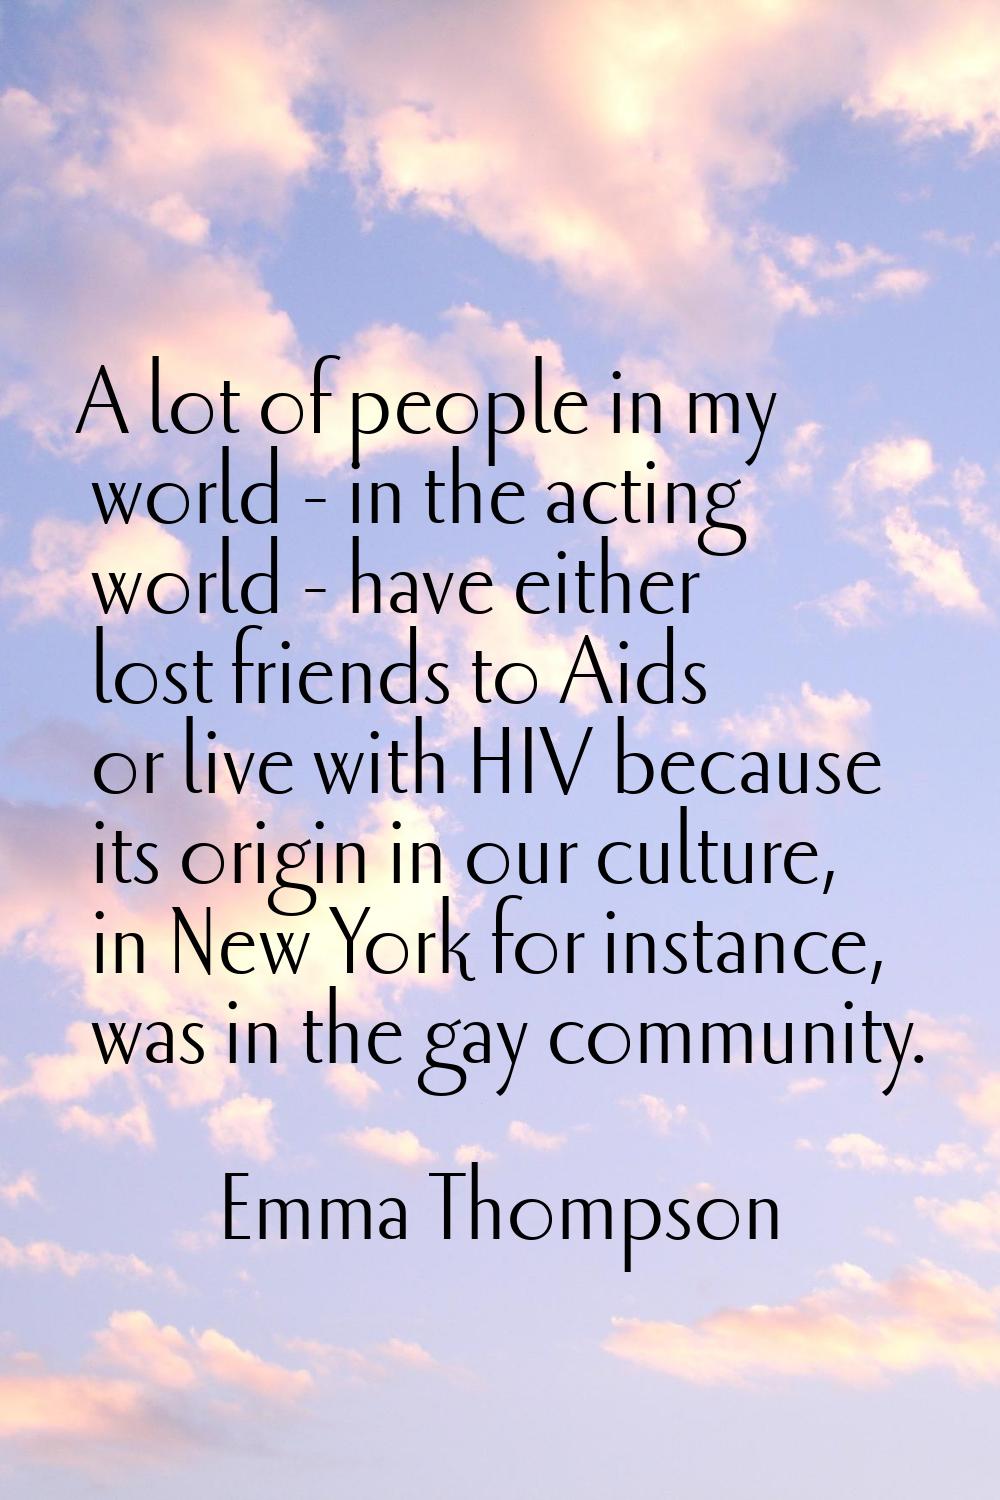 A lot of people in my world - in the acting world - have either lost friends to Aids or live with H